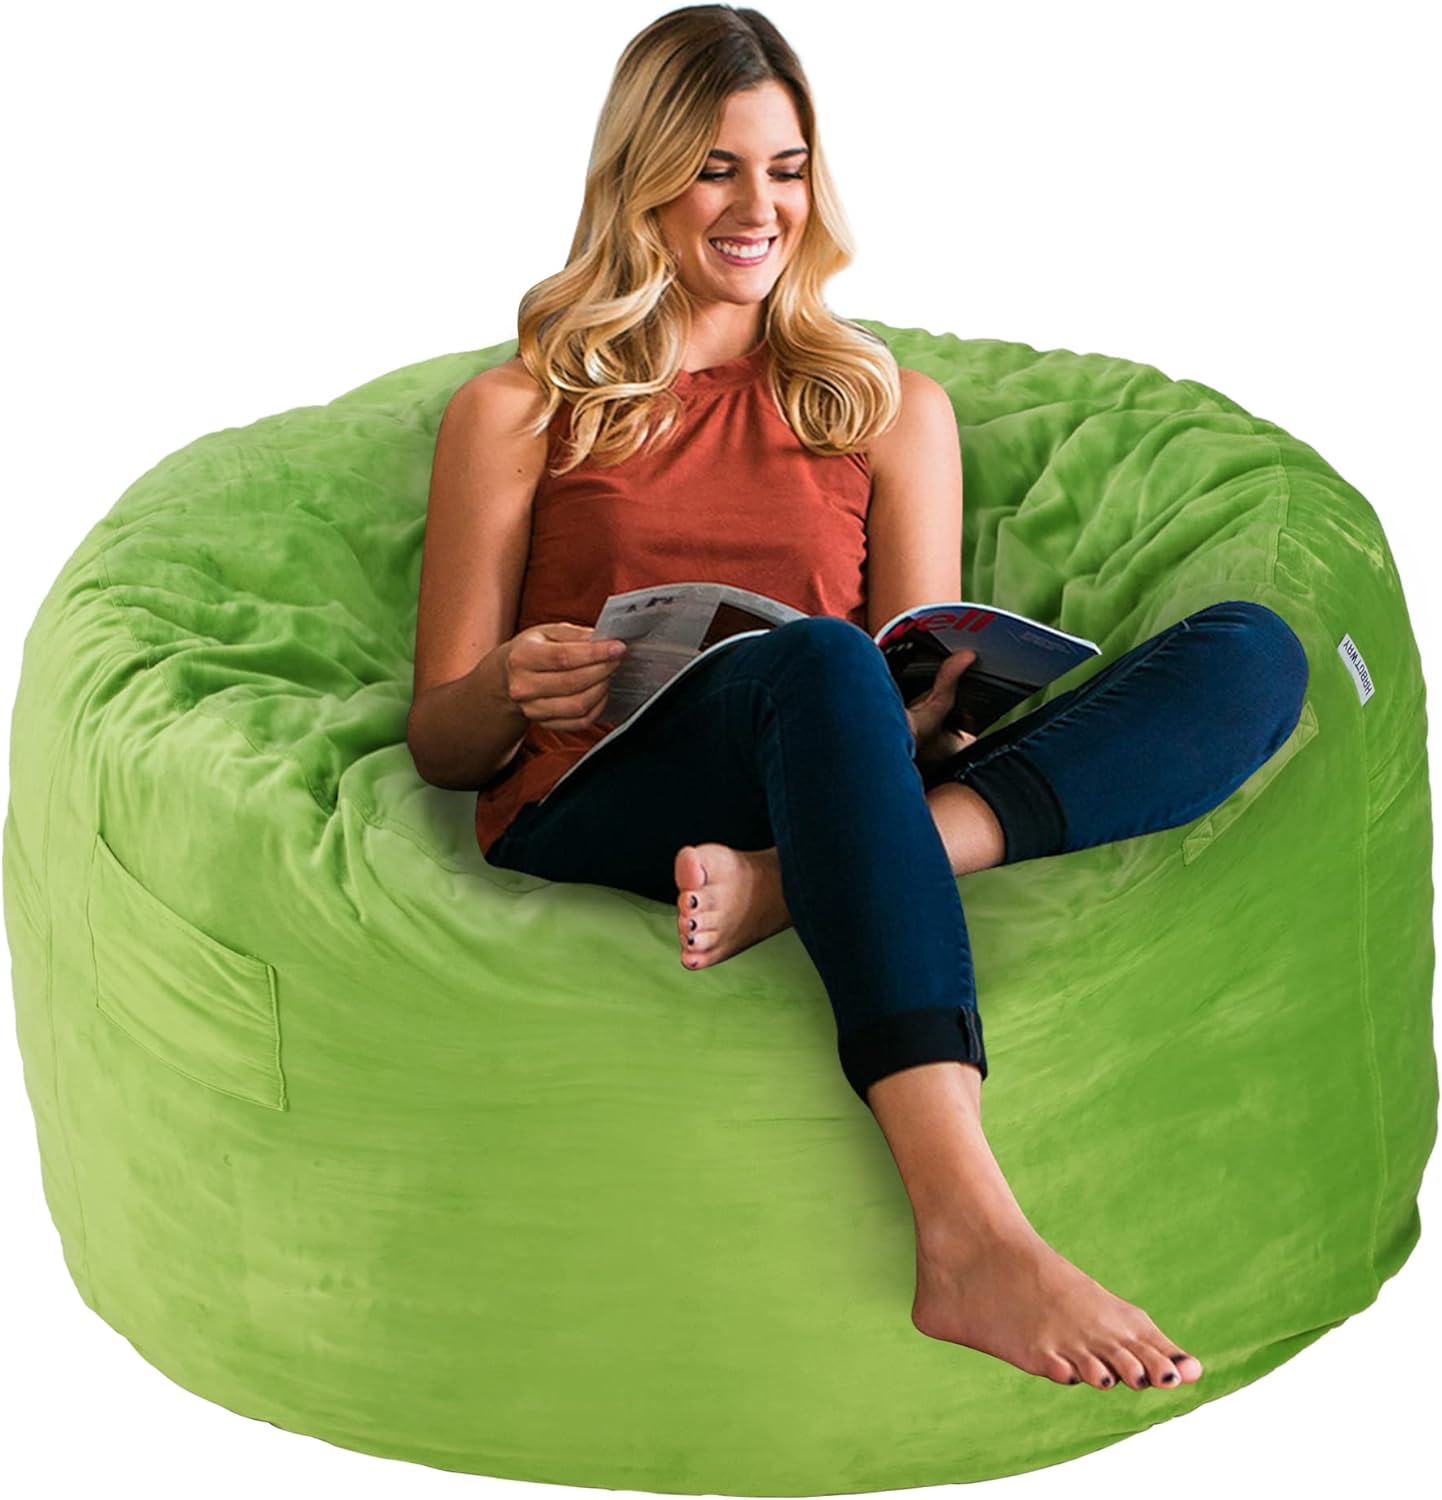 HABUTWAY Bean Bag Chair 3Ft Luxurious Velvet Ultra Soft Fur with High-Rebound Memory Foam Bean Bag Chairs for Adults Plush Lazy Sofa with Fluffy Removable Sponge 3'(Green)